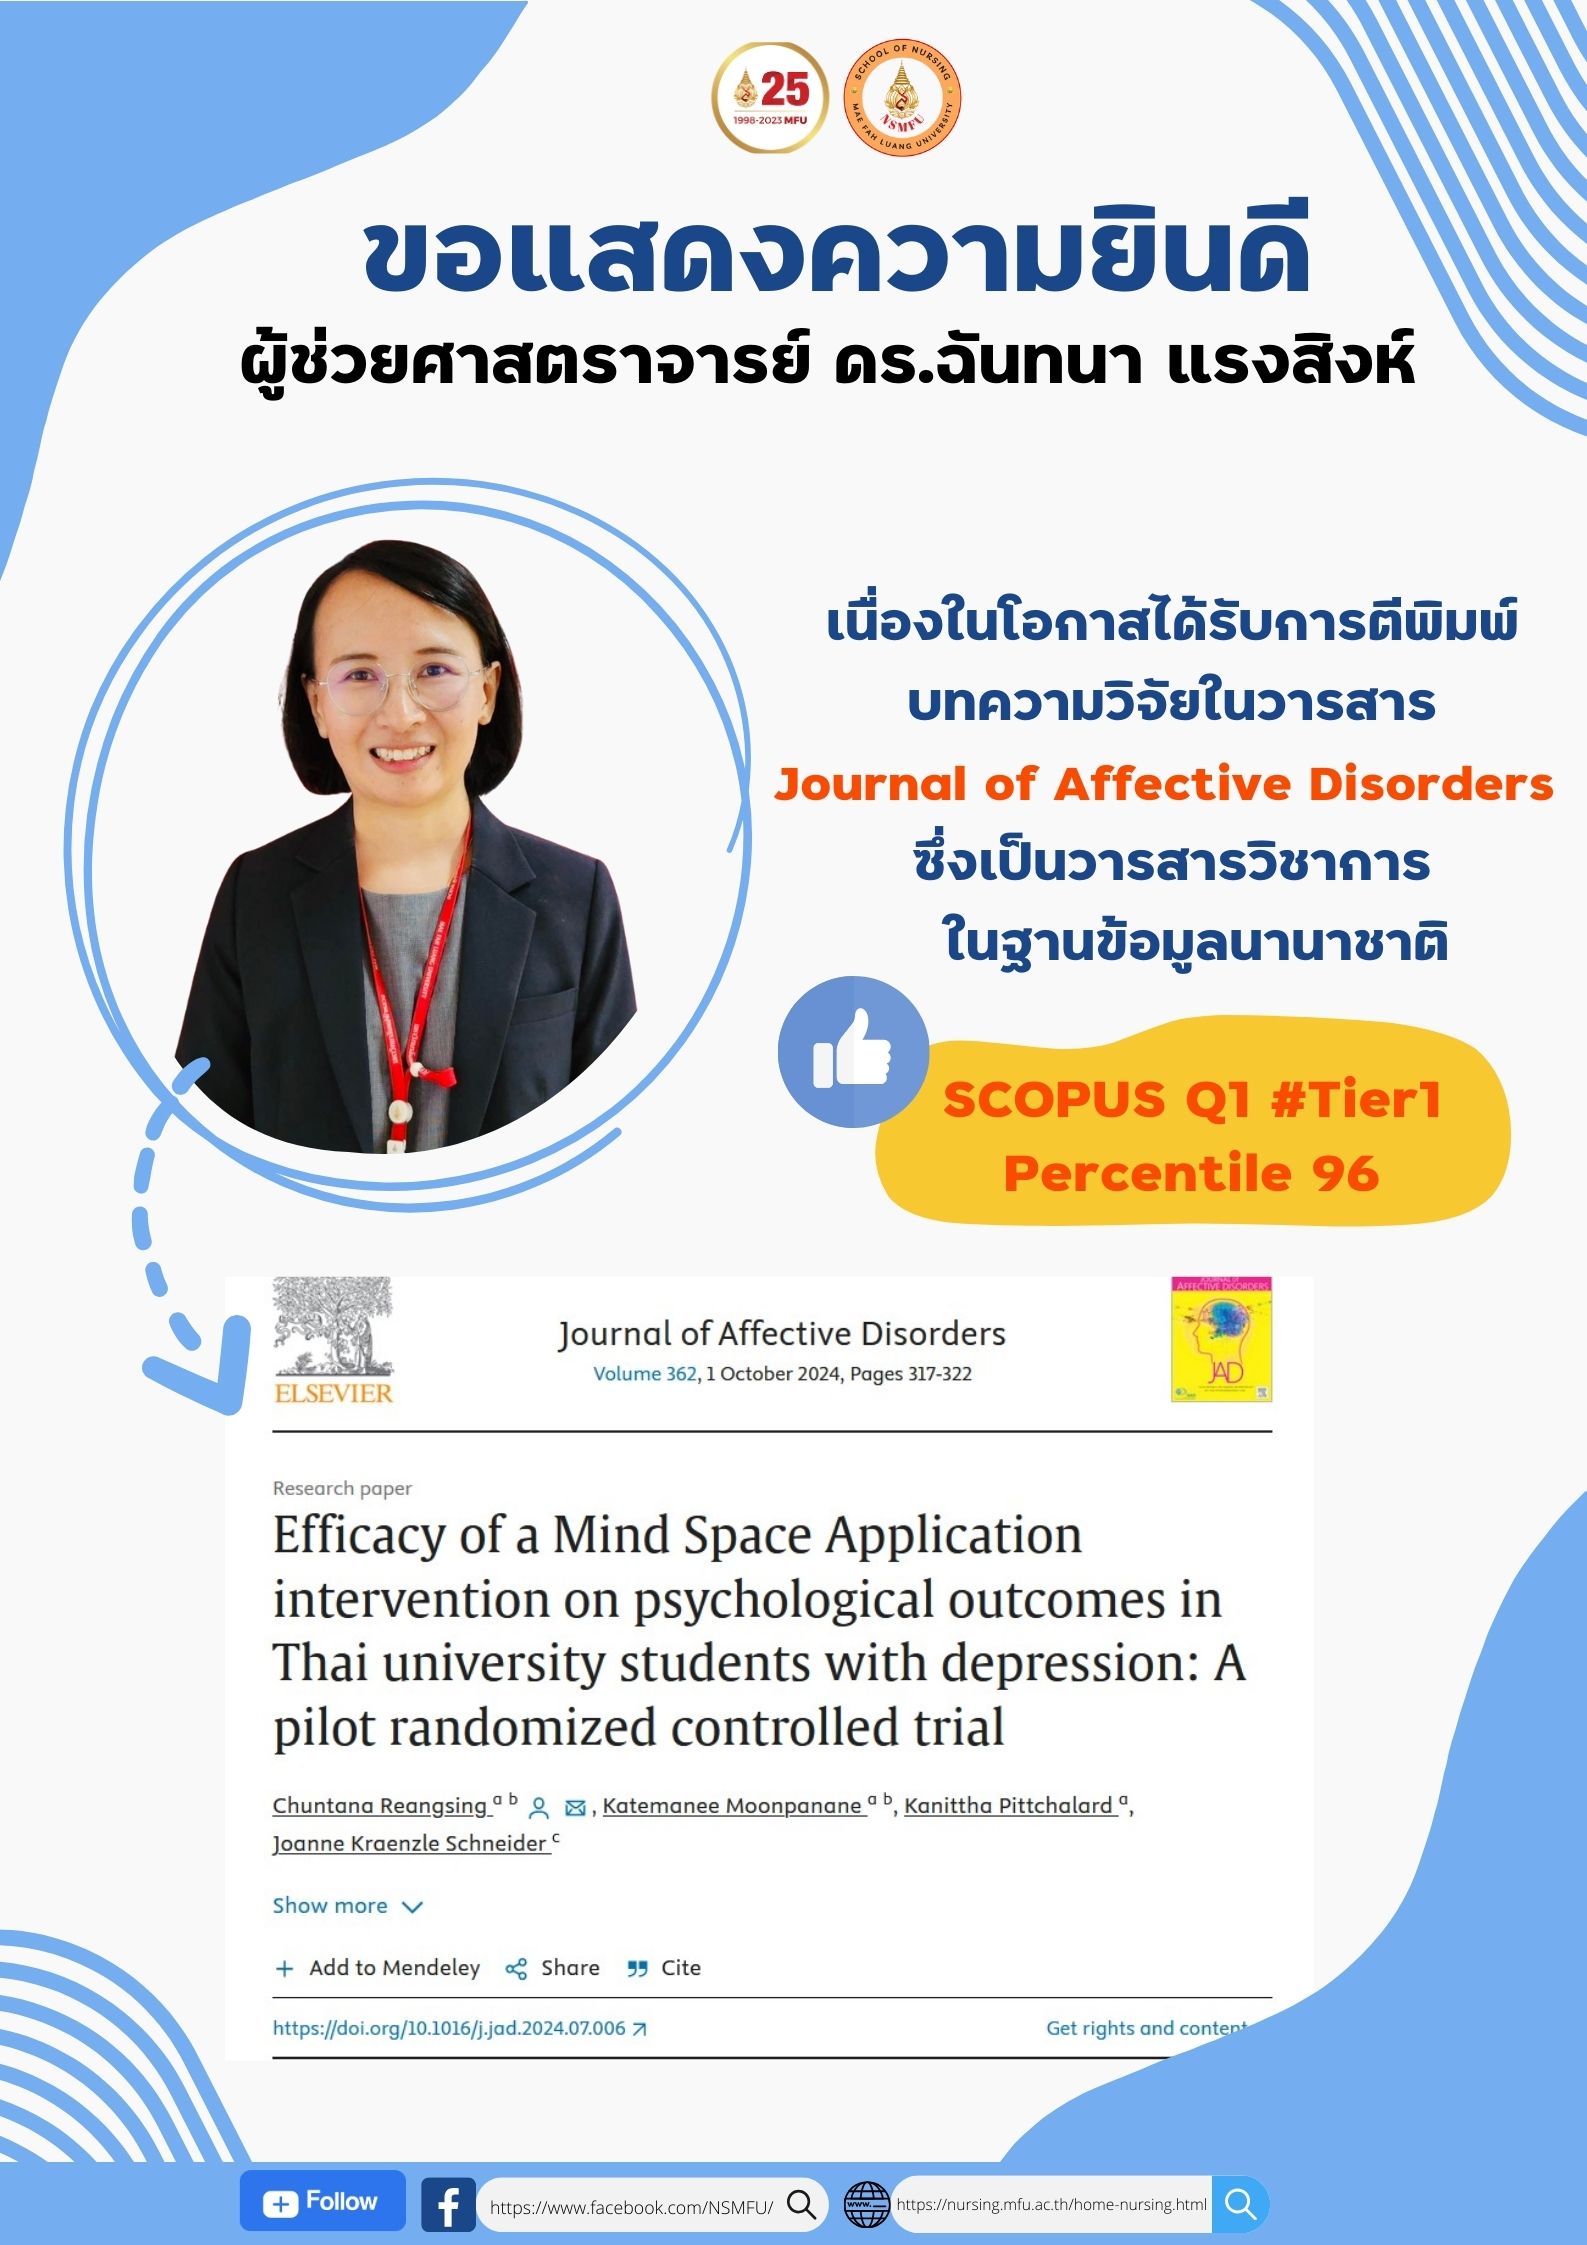 Congratulations from the MFU School of Nursing to Asst. Prof. Dr. Chuntana Reangsing on the publication of her research in the  Journal of Affective Disorders, a SCOPUS Q1: Tier1 International Journal. 